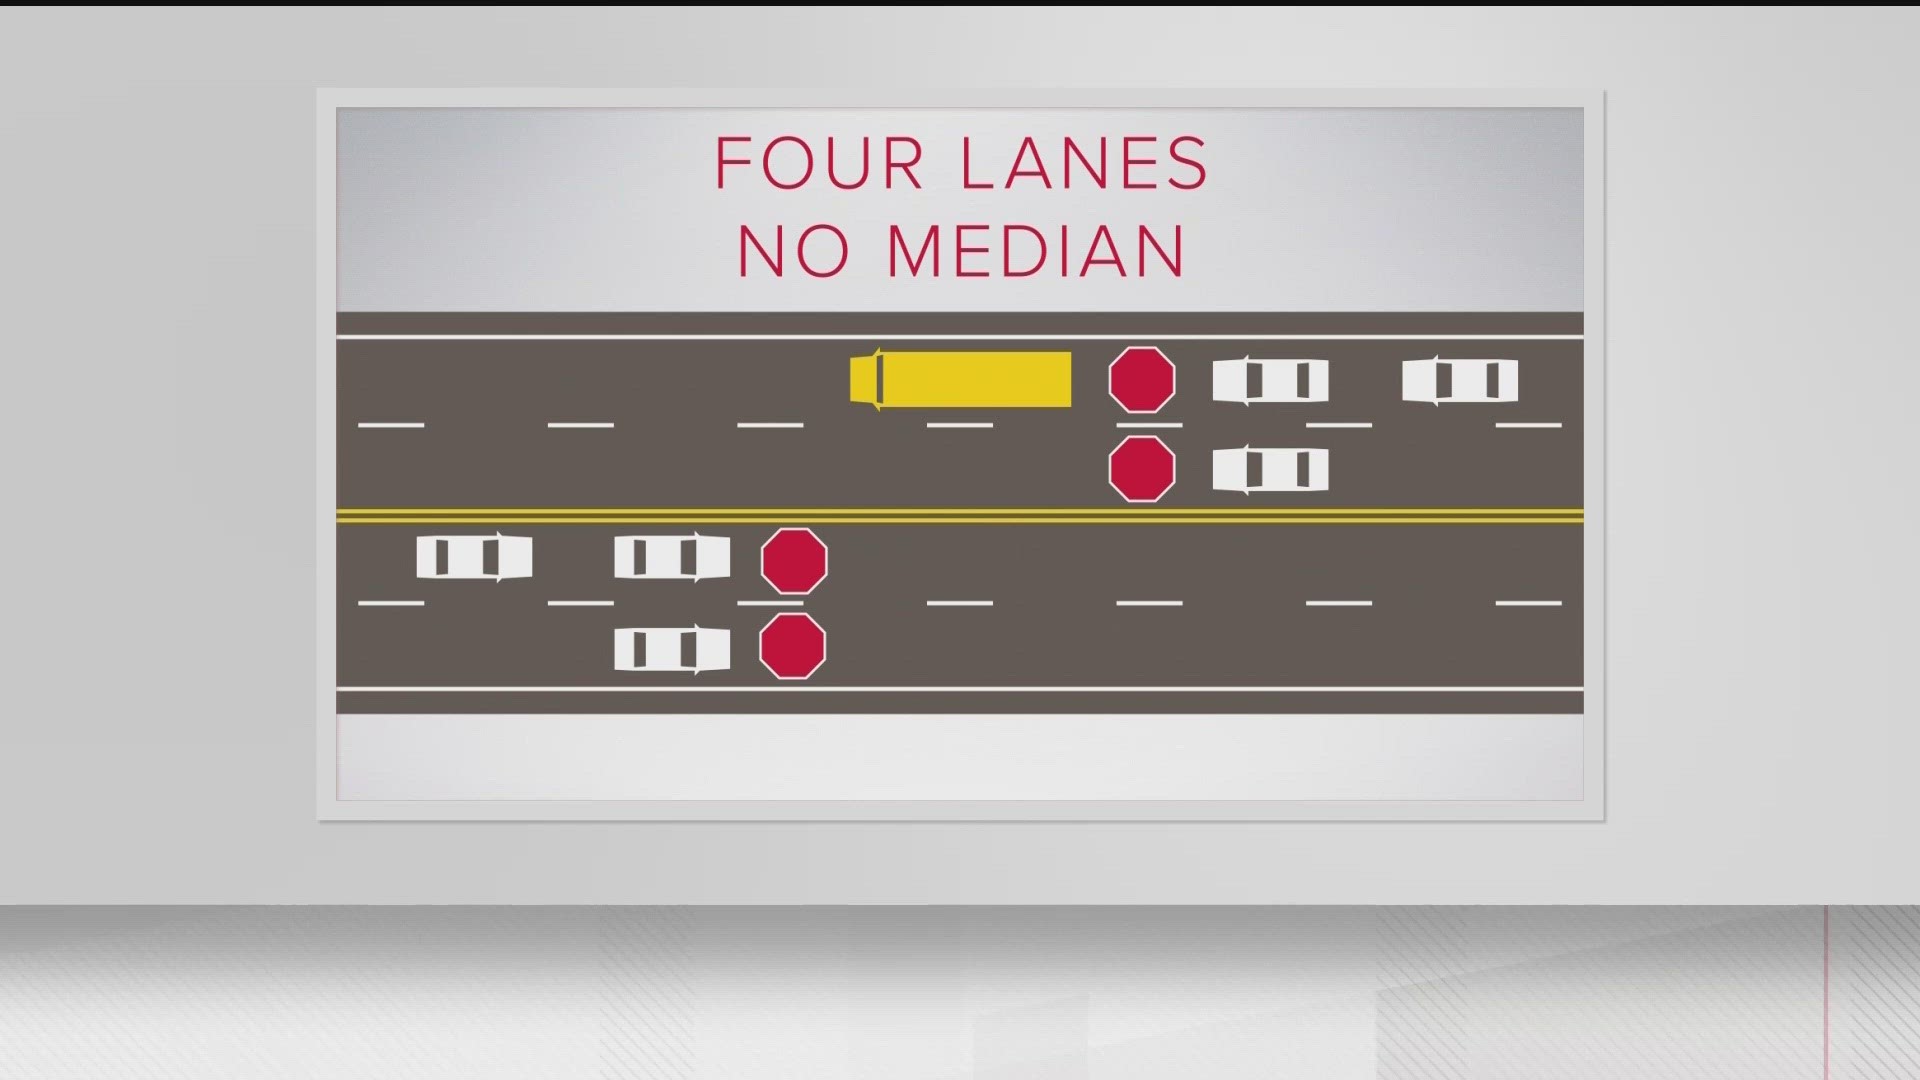 Whether it's a two lane road, multi-lane, or divided highway, it's important to be aware of the law.